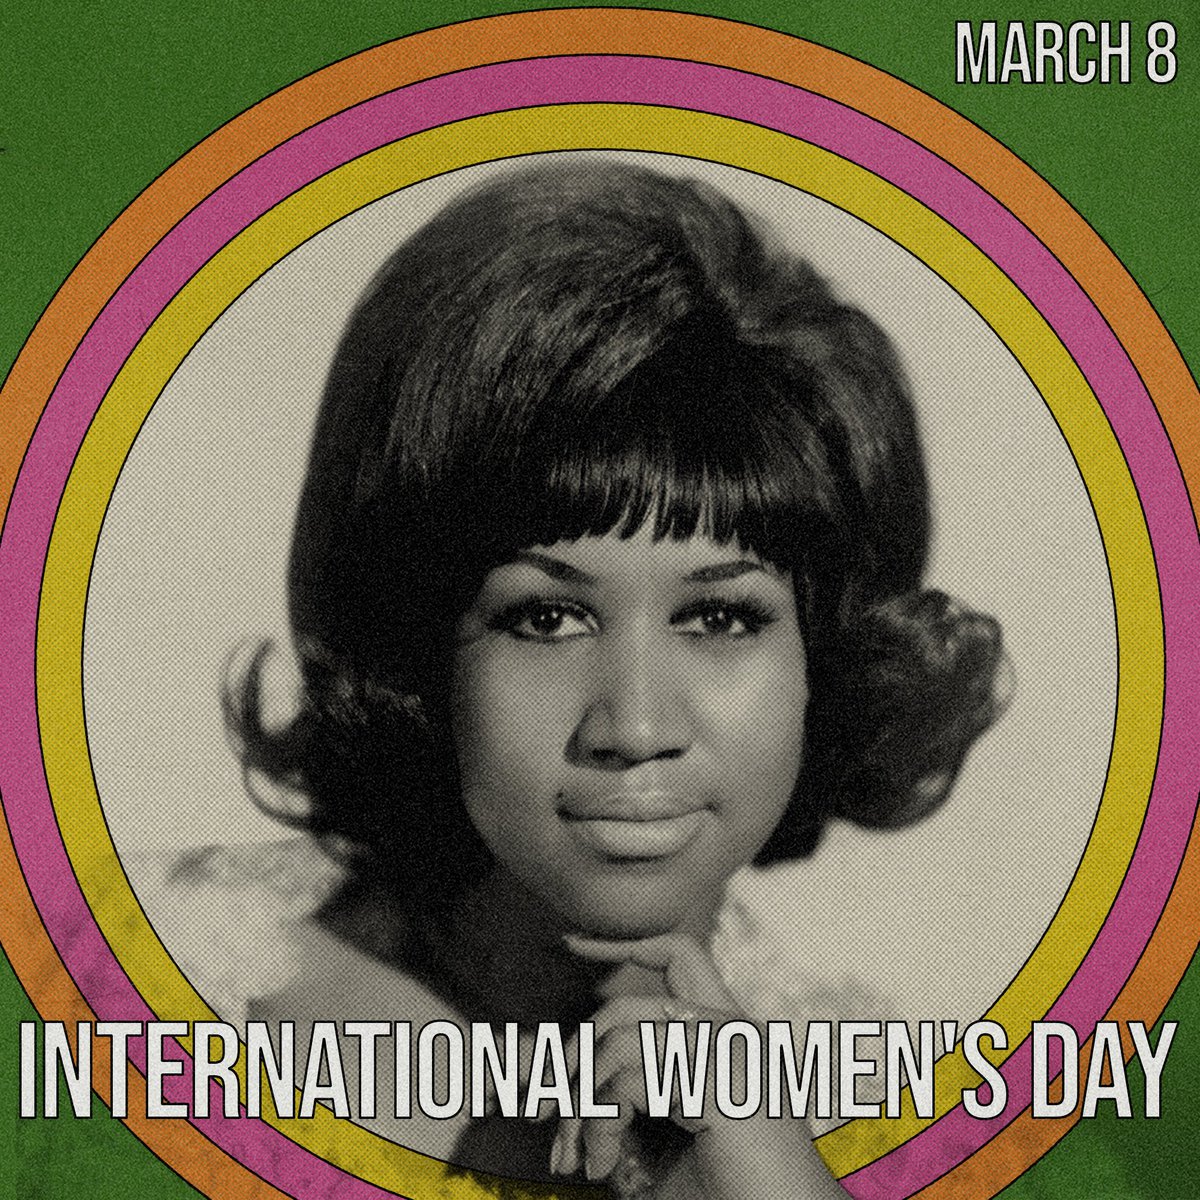 🎶 'Now this is a song to celebrate The conscious liberation of the female state Mothers, daughters and their daughters too Woman to woman, we're singin' with you' 🎶 -Aretha Franklin Happy International Women's Day, Aretha fans! Photo courtesy of Getty Images.